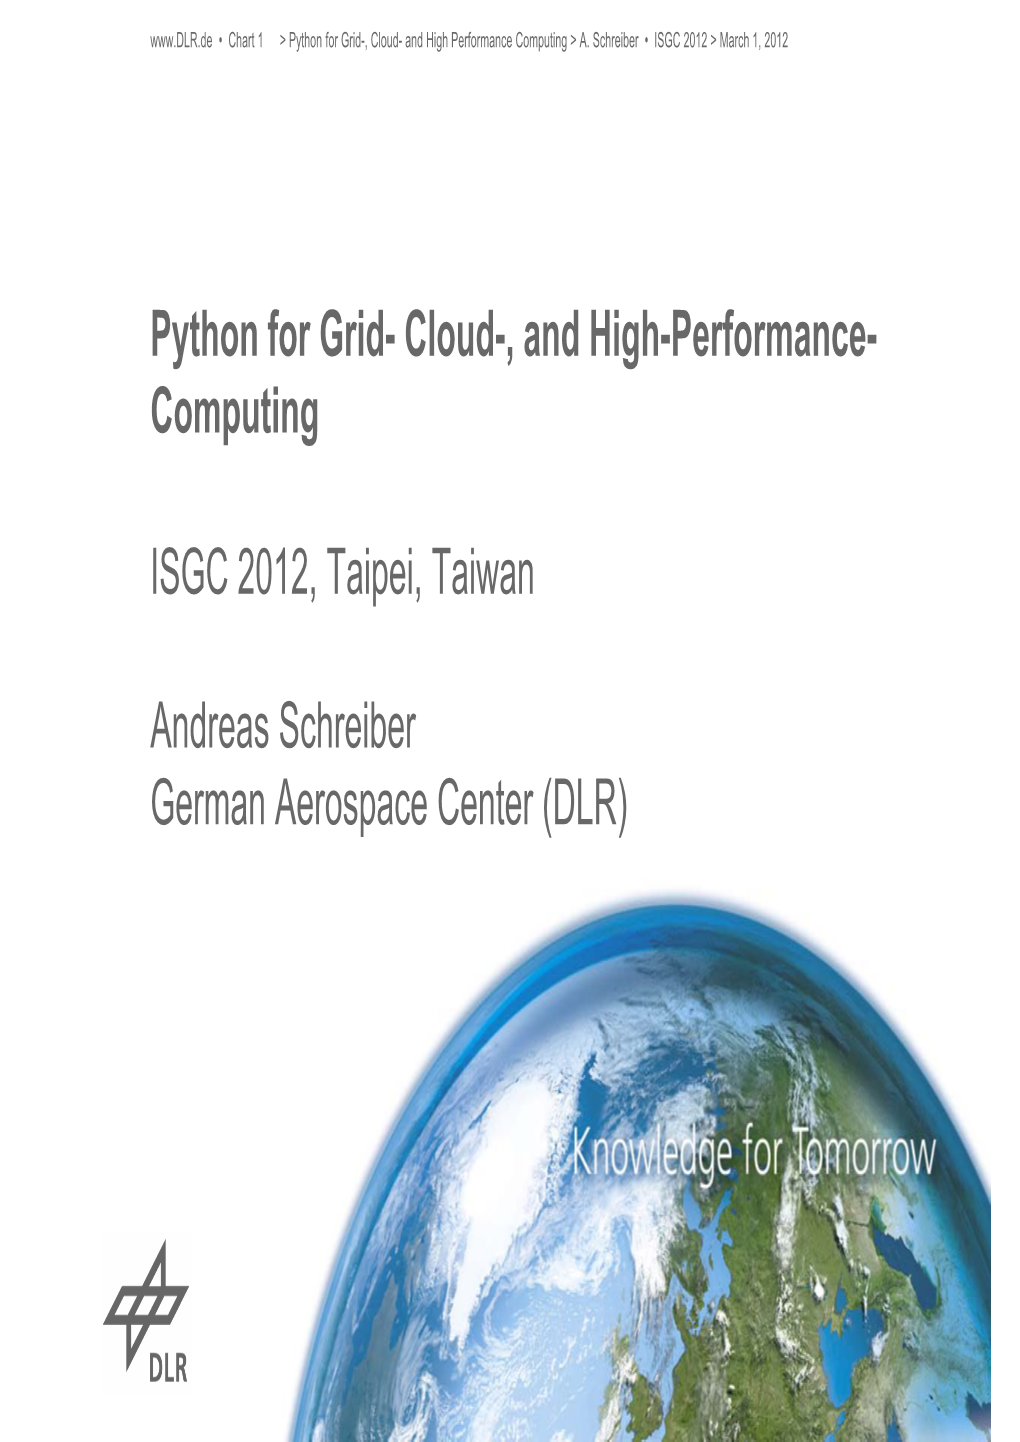 Python for Grid-, Cloud- and High Performance Computing > A